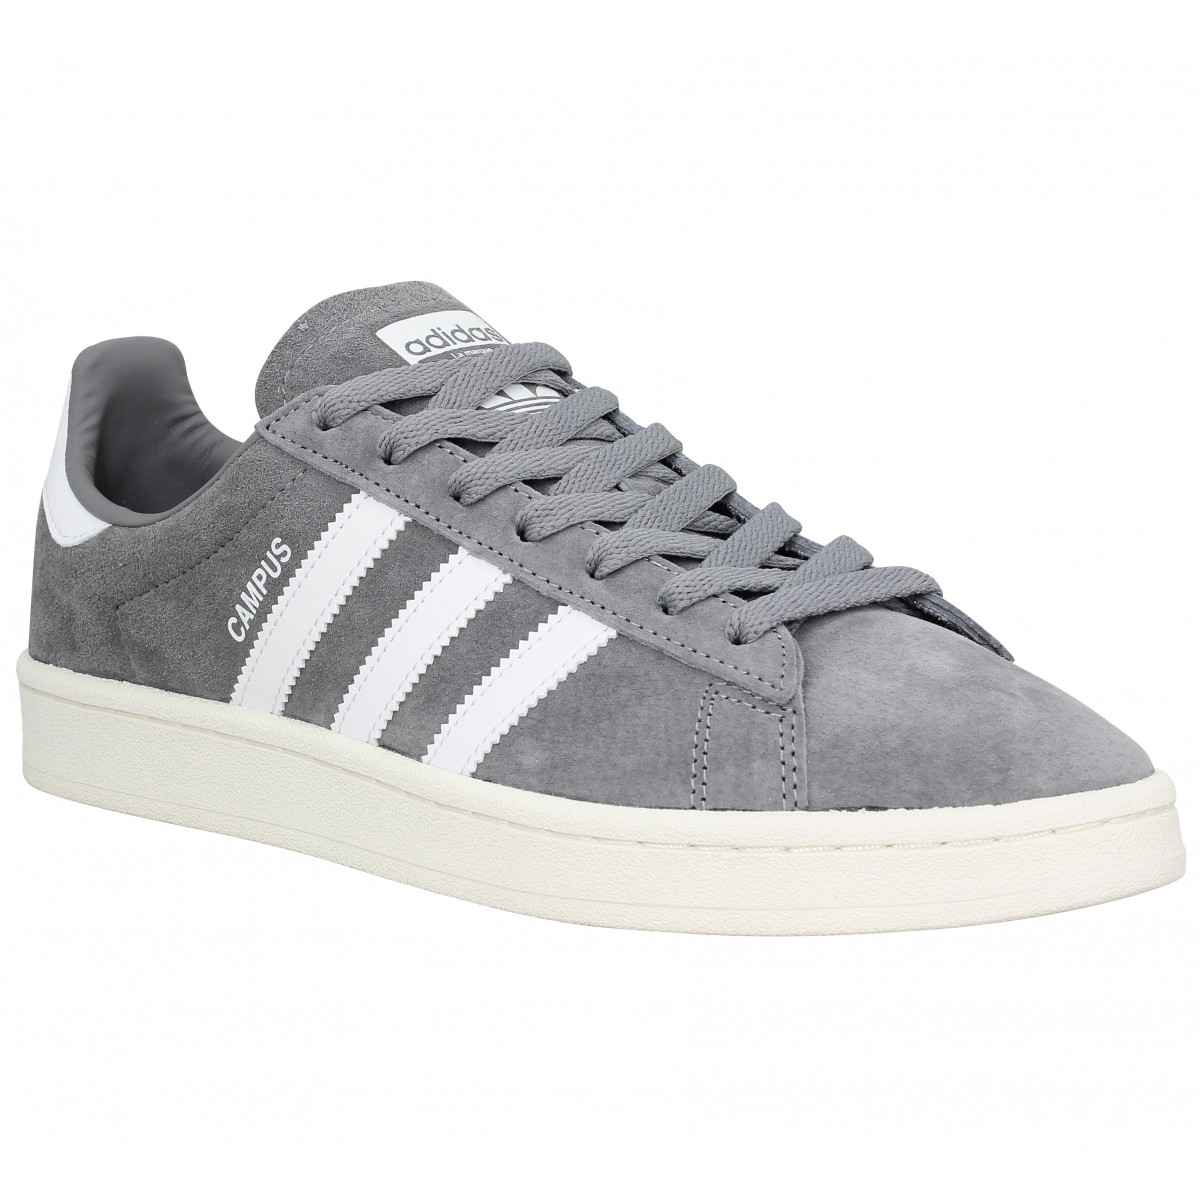 adidas campus homme grise